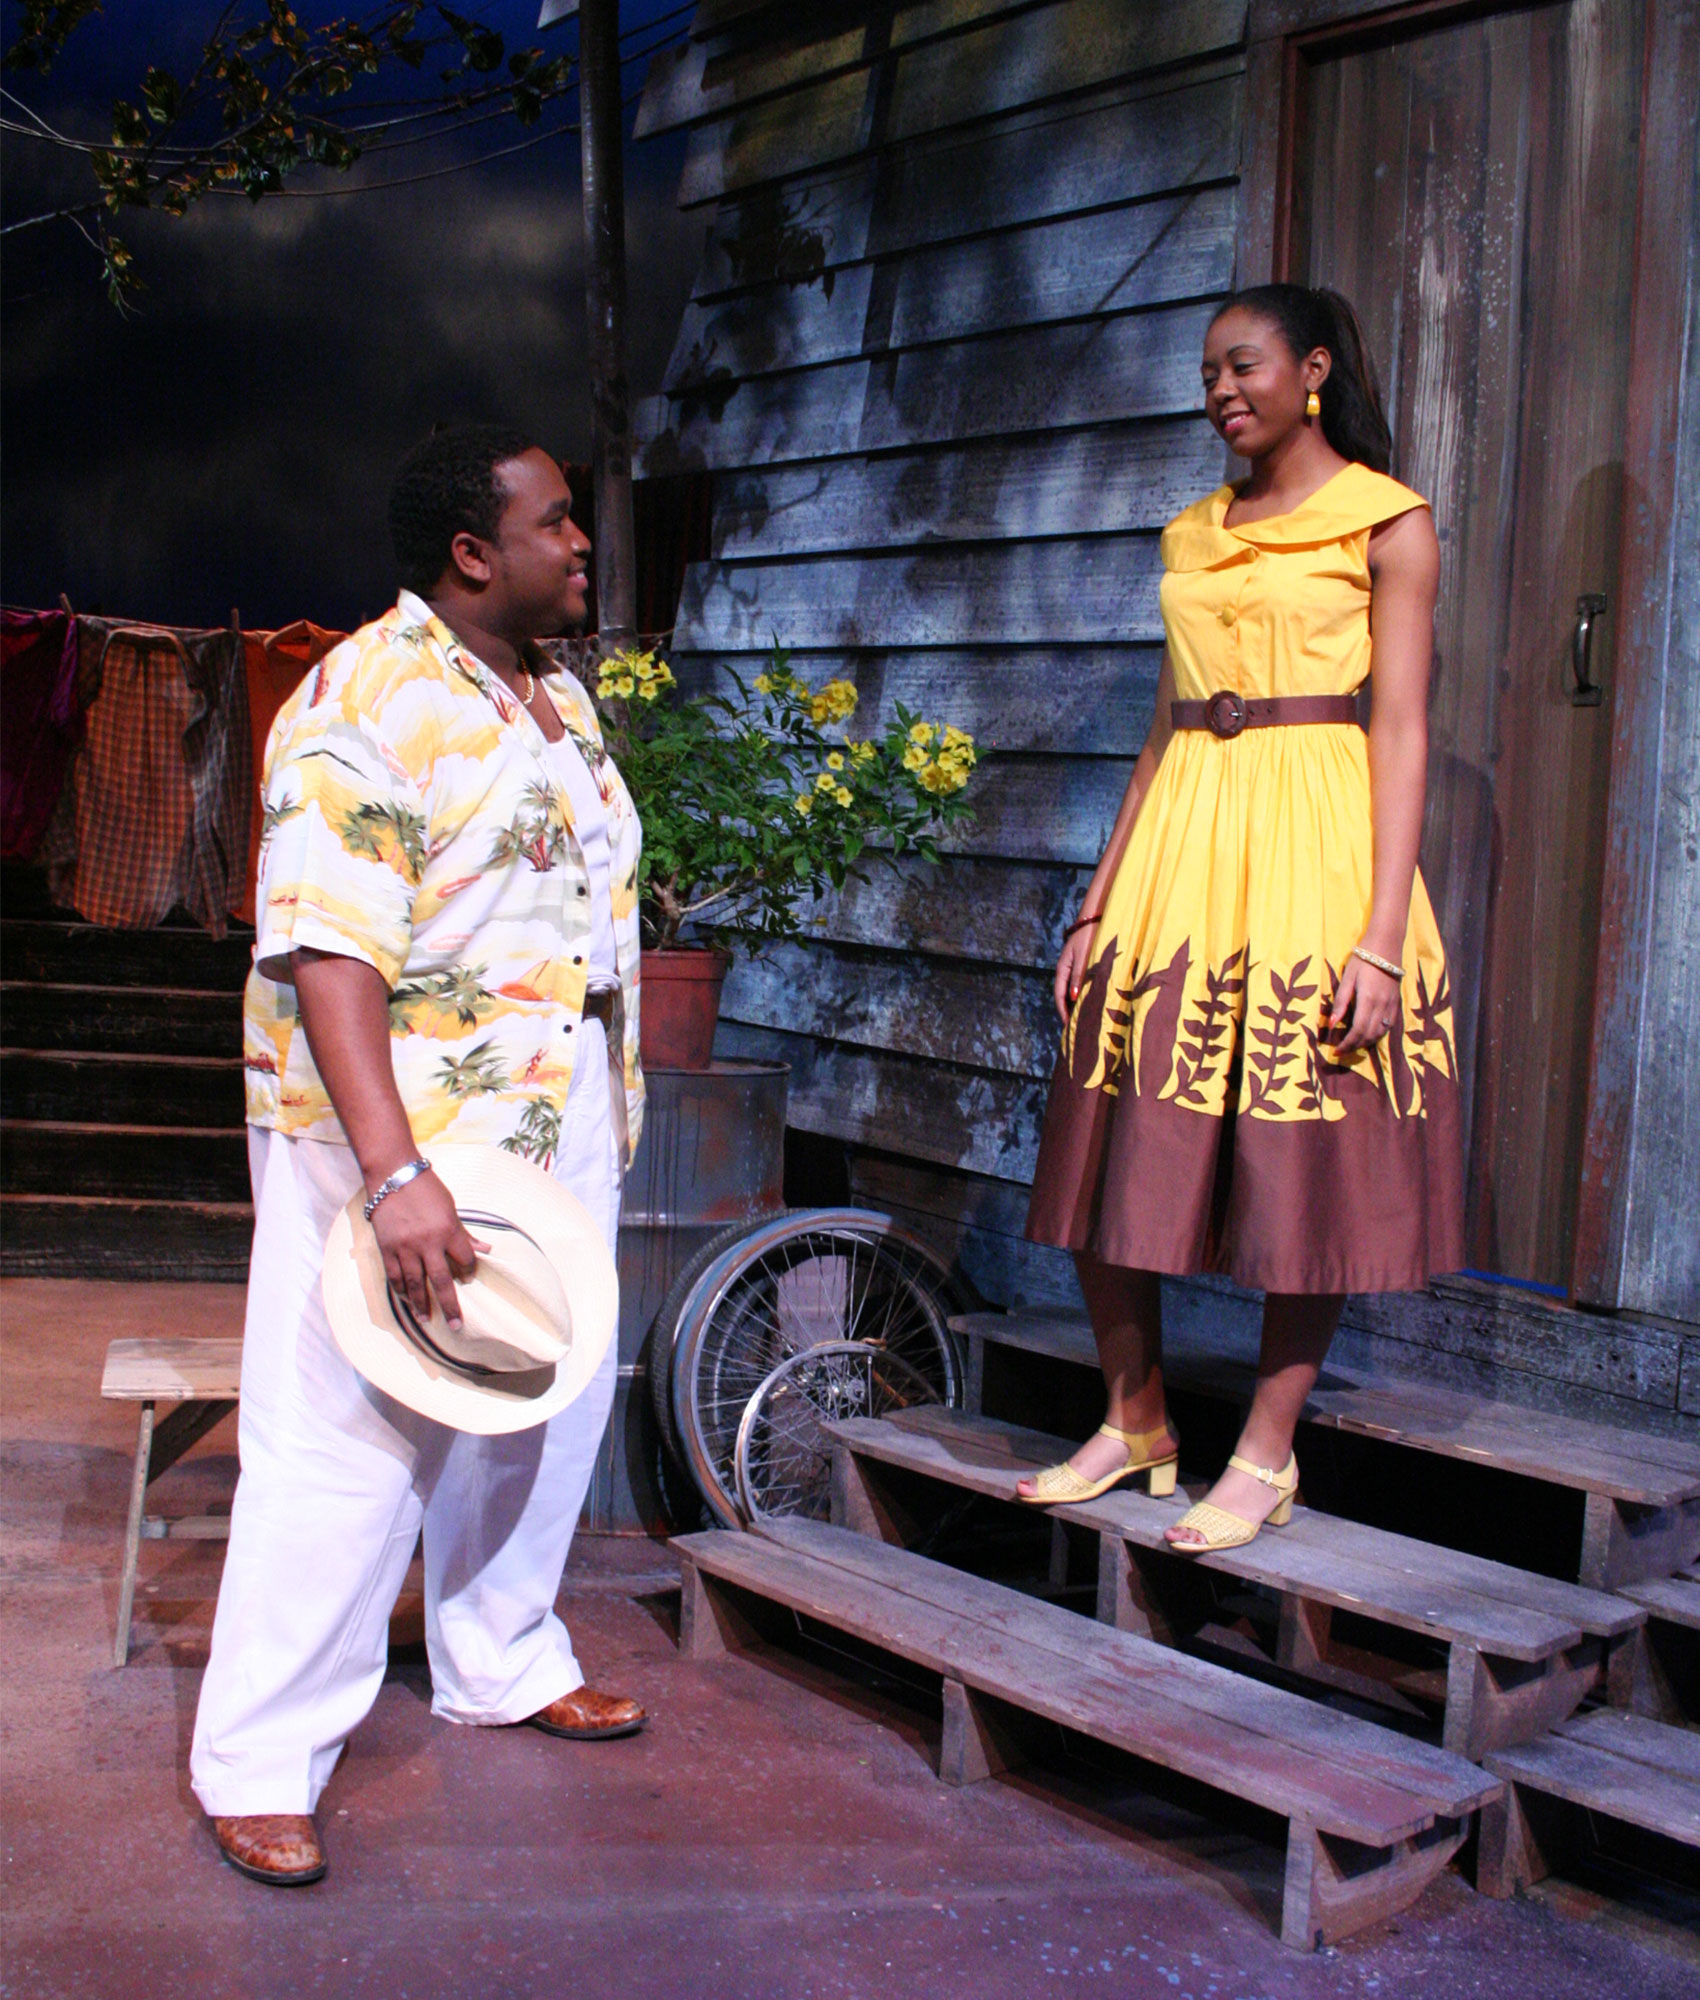 A man holds a hat in his hand at his side as he smiles at a woman standing on porch steps. The woman is smiling back down at the man. 